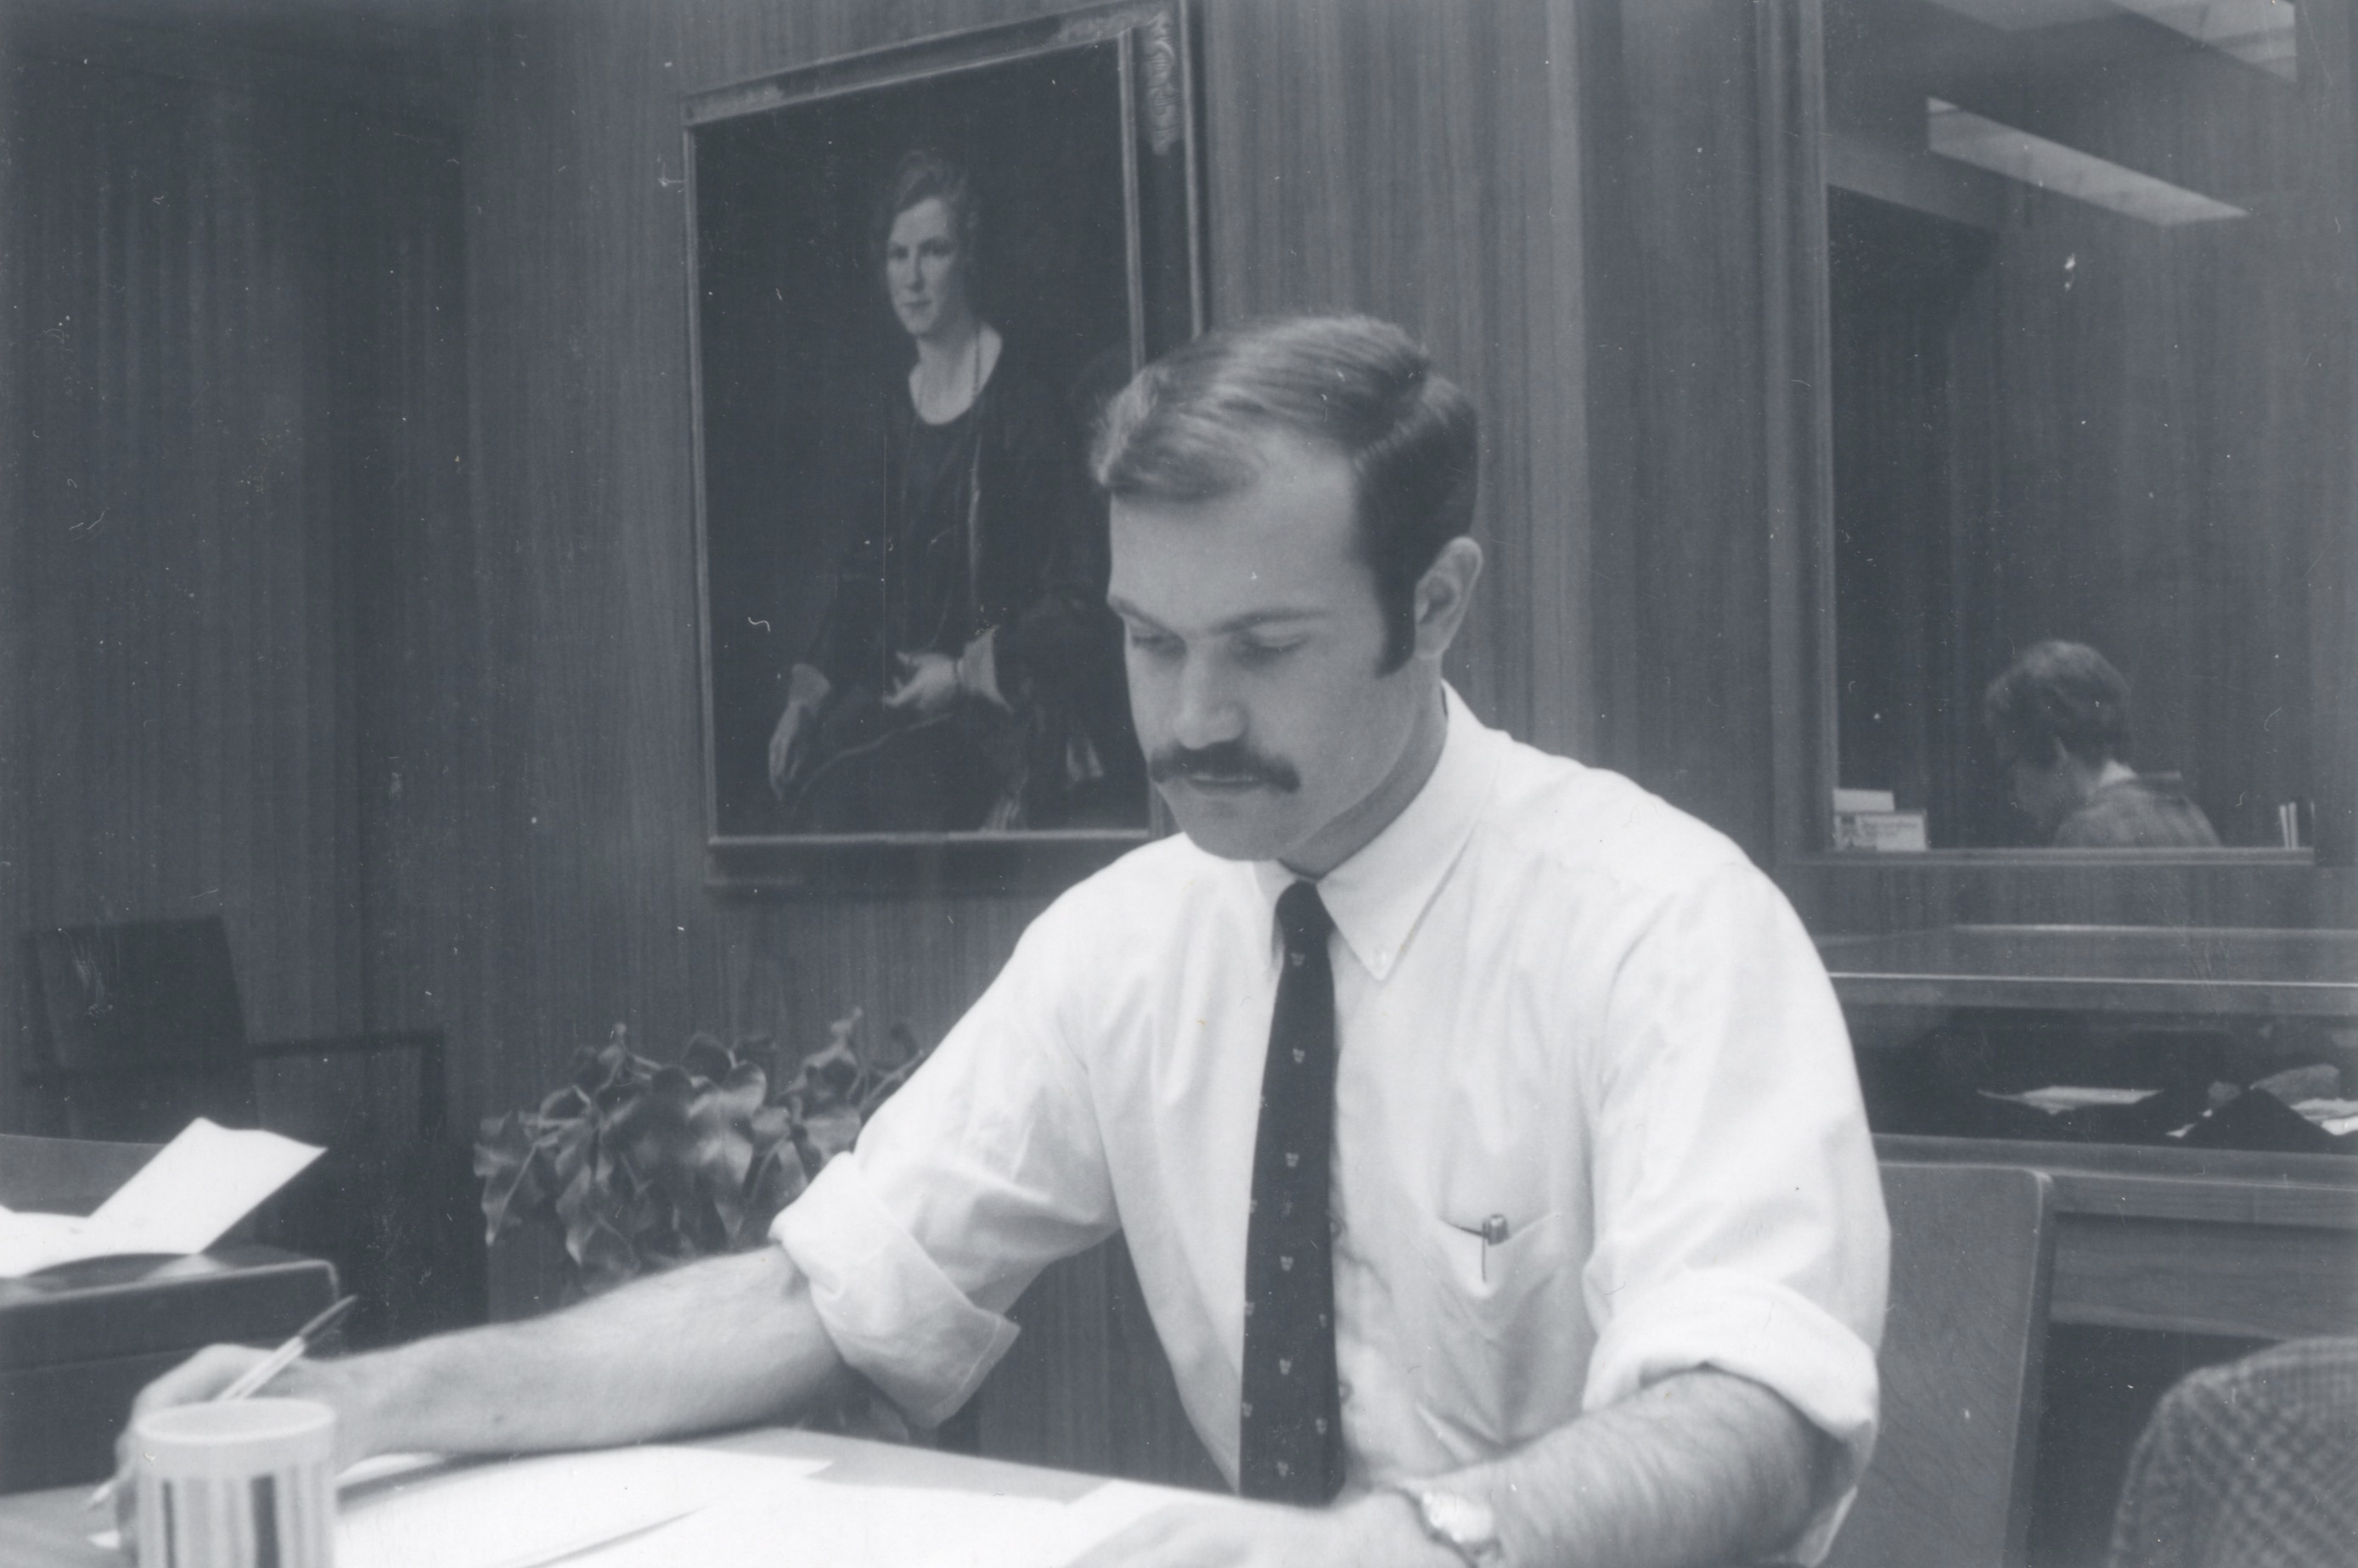 Kenneth L. Taylor working in the History of Science Collections after coming to OU as one of the early faculty members in the Department of the History of Science